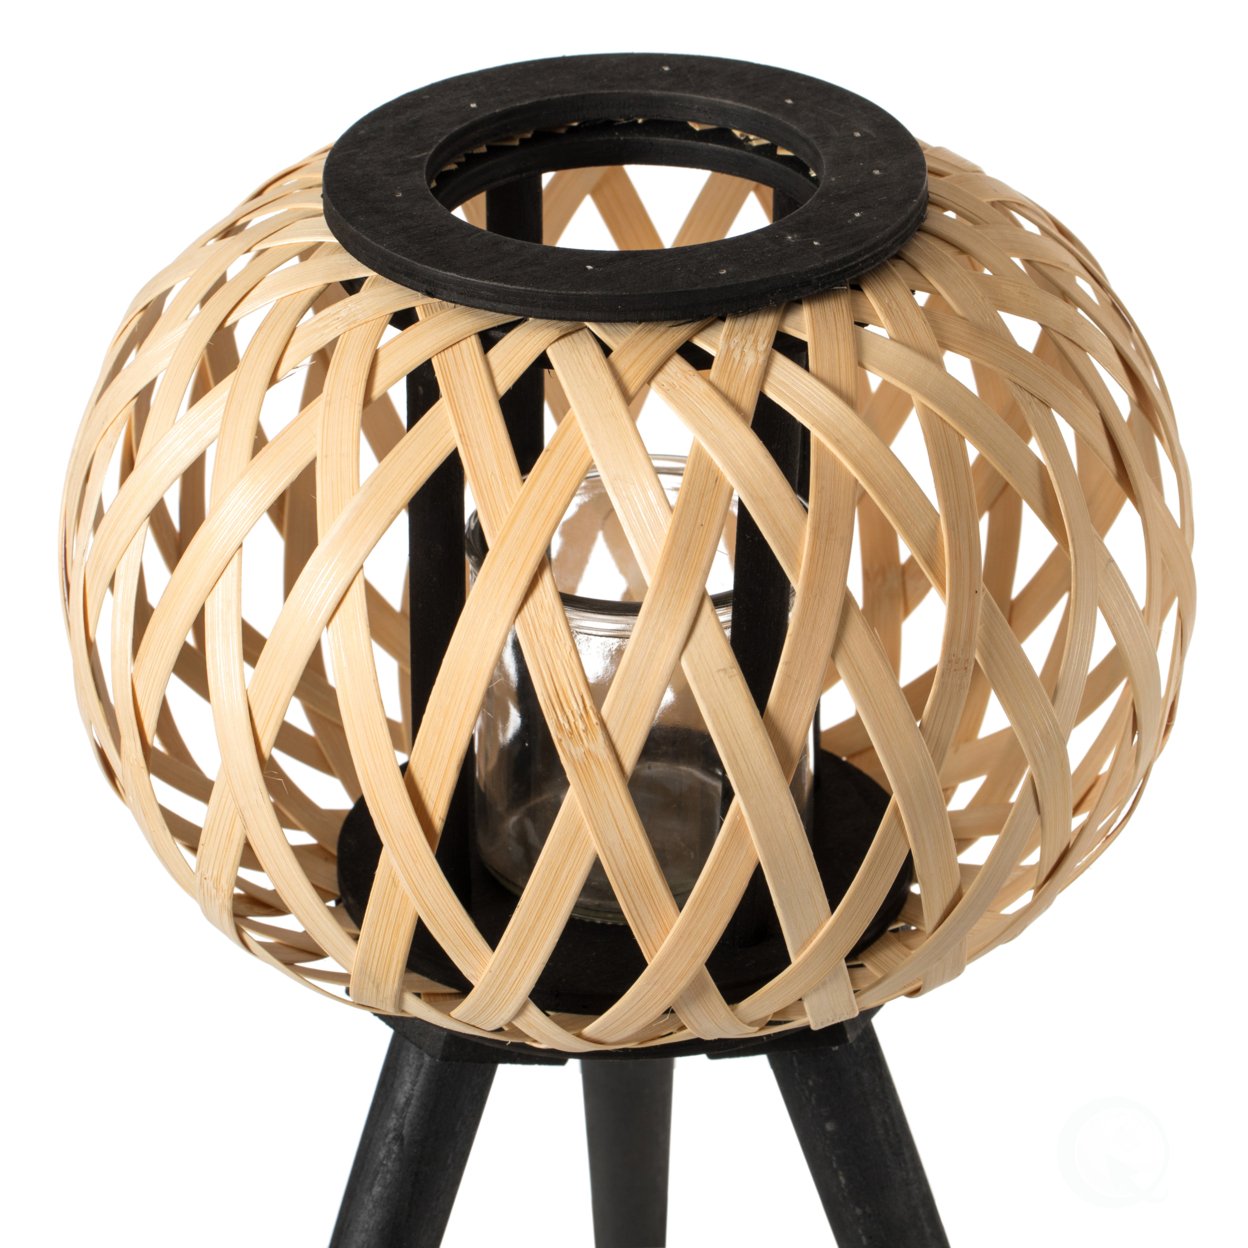 Modern Black, Natural Bamboo Candle Decorative Trellis Design Lantern With Stand